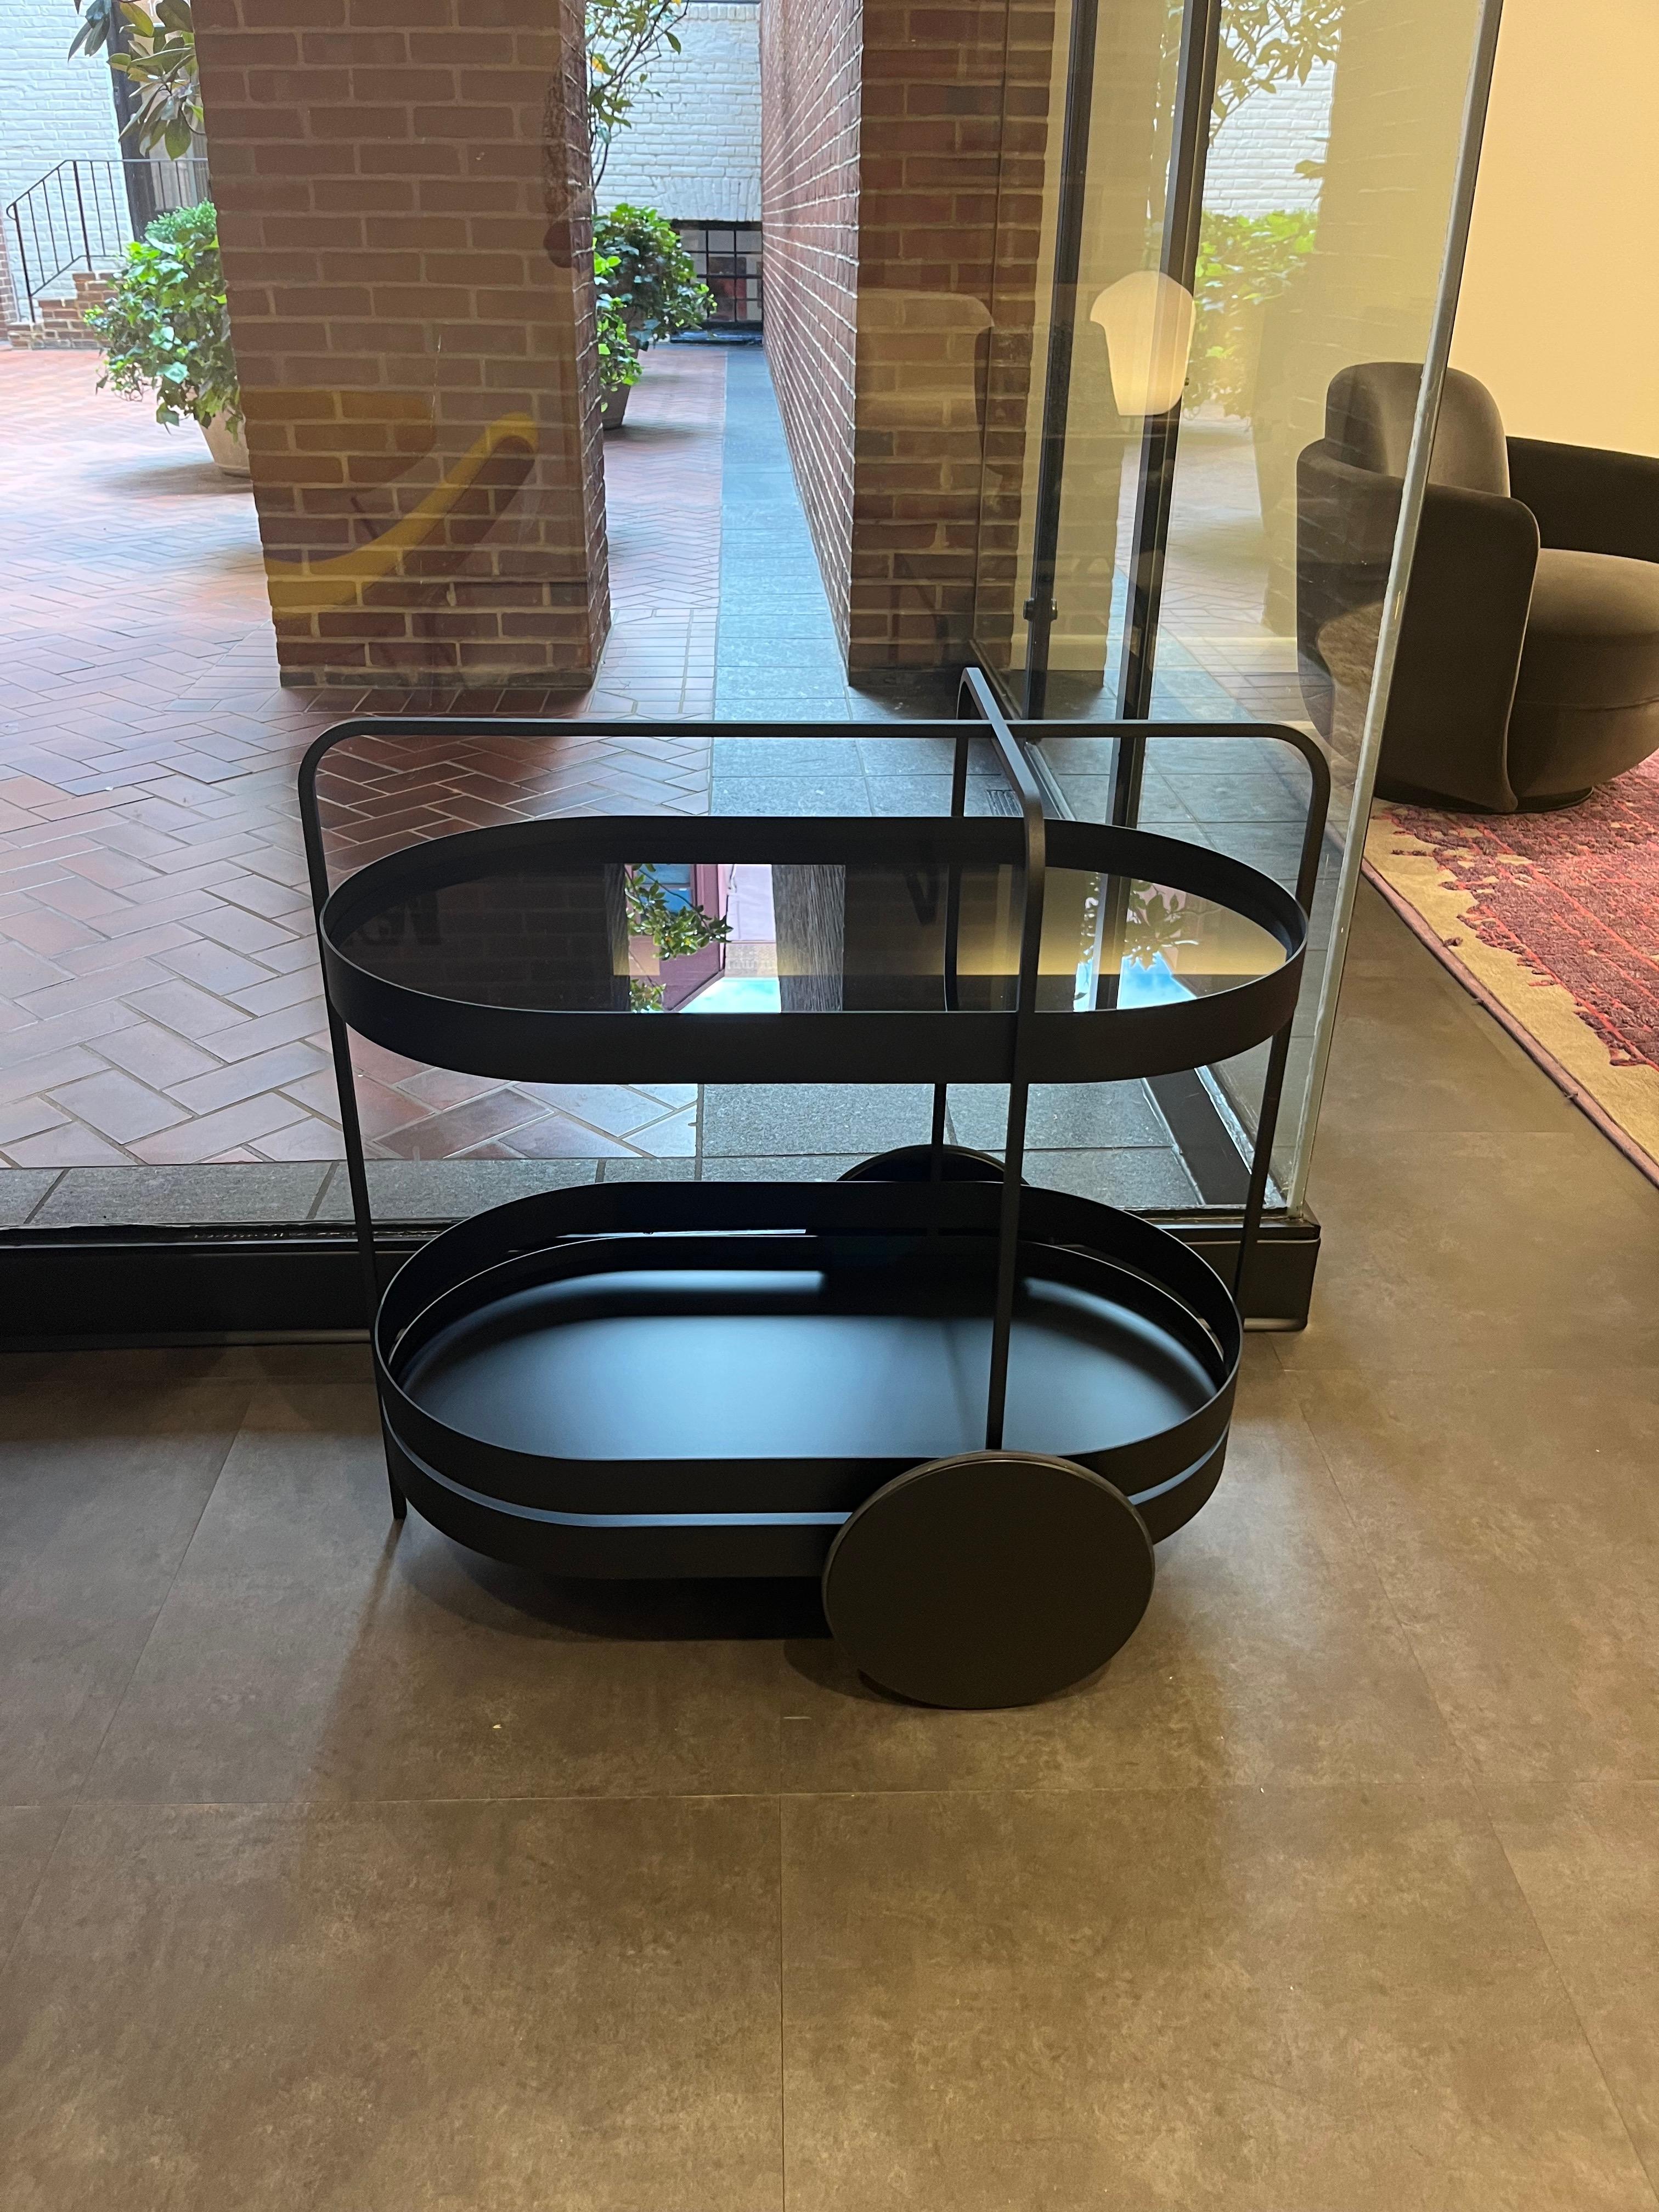 A future Classic. The clear lines and stylish practicality of the grace serving trolley make for a winning combination. Its Minimalist form is the perfect modern twist on a Classic item. Use as a mobile bar or side table, or for storage in home